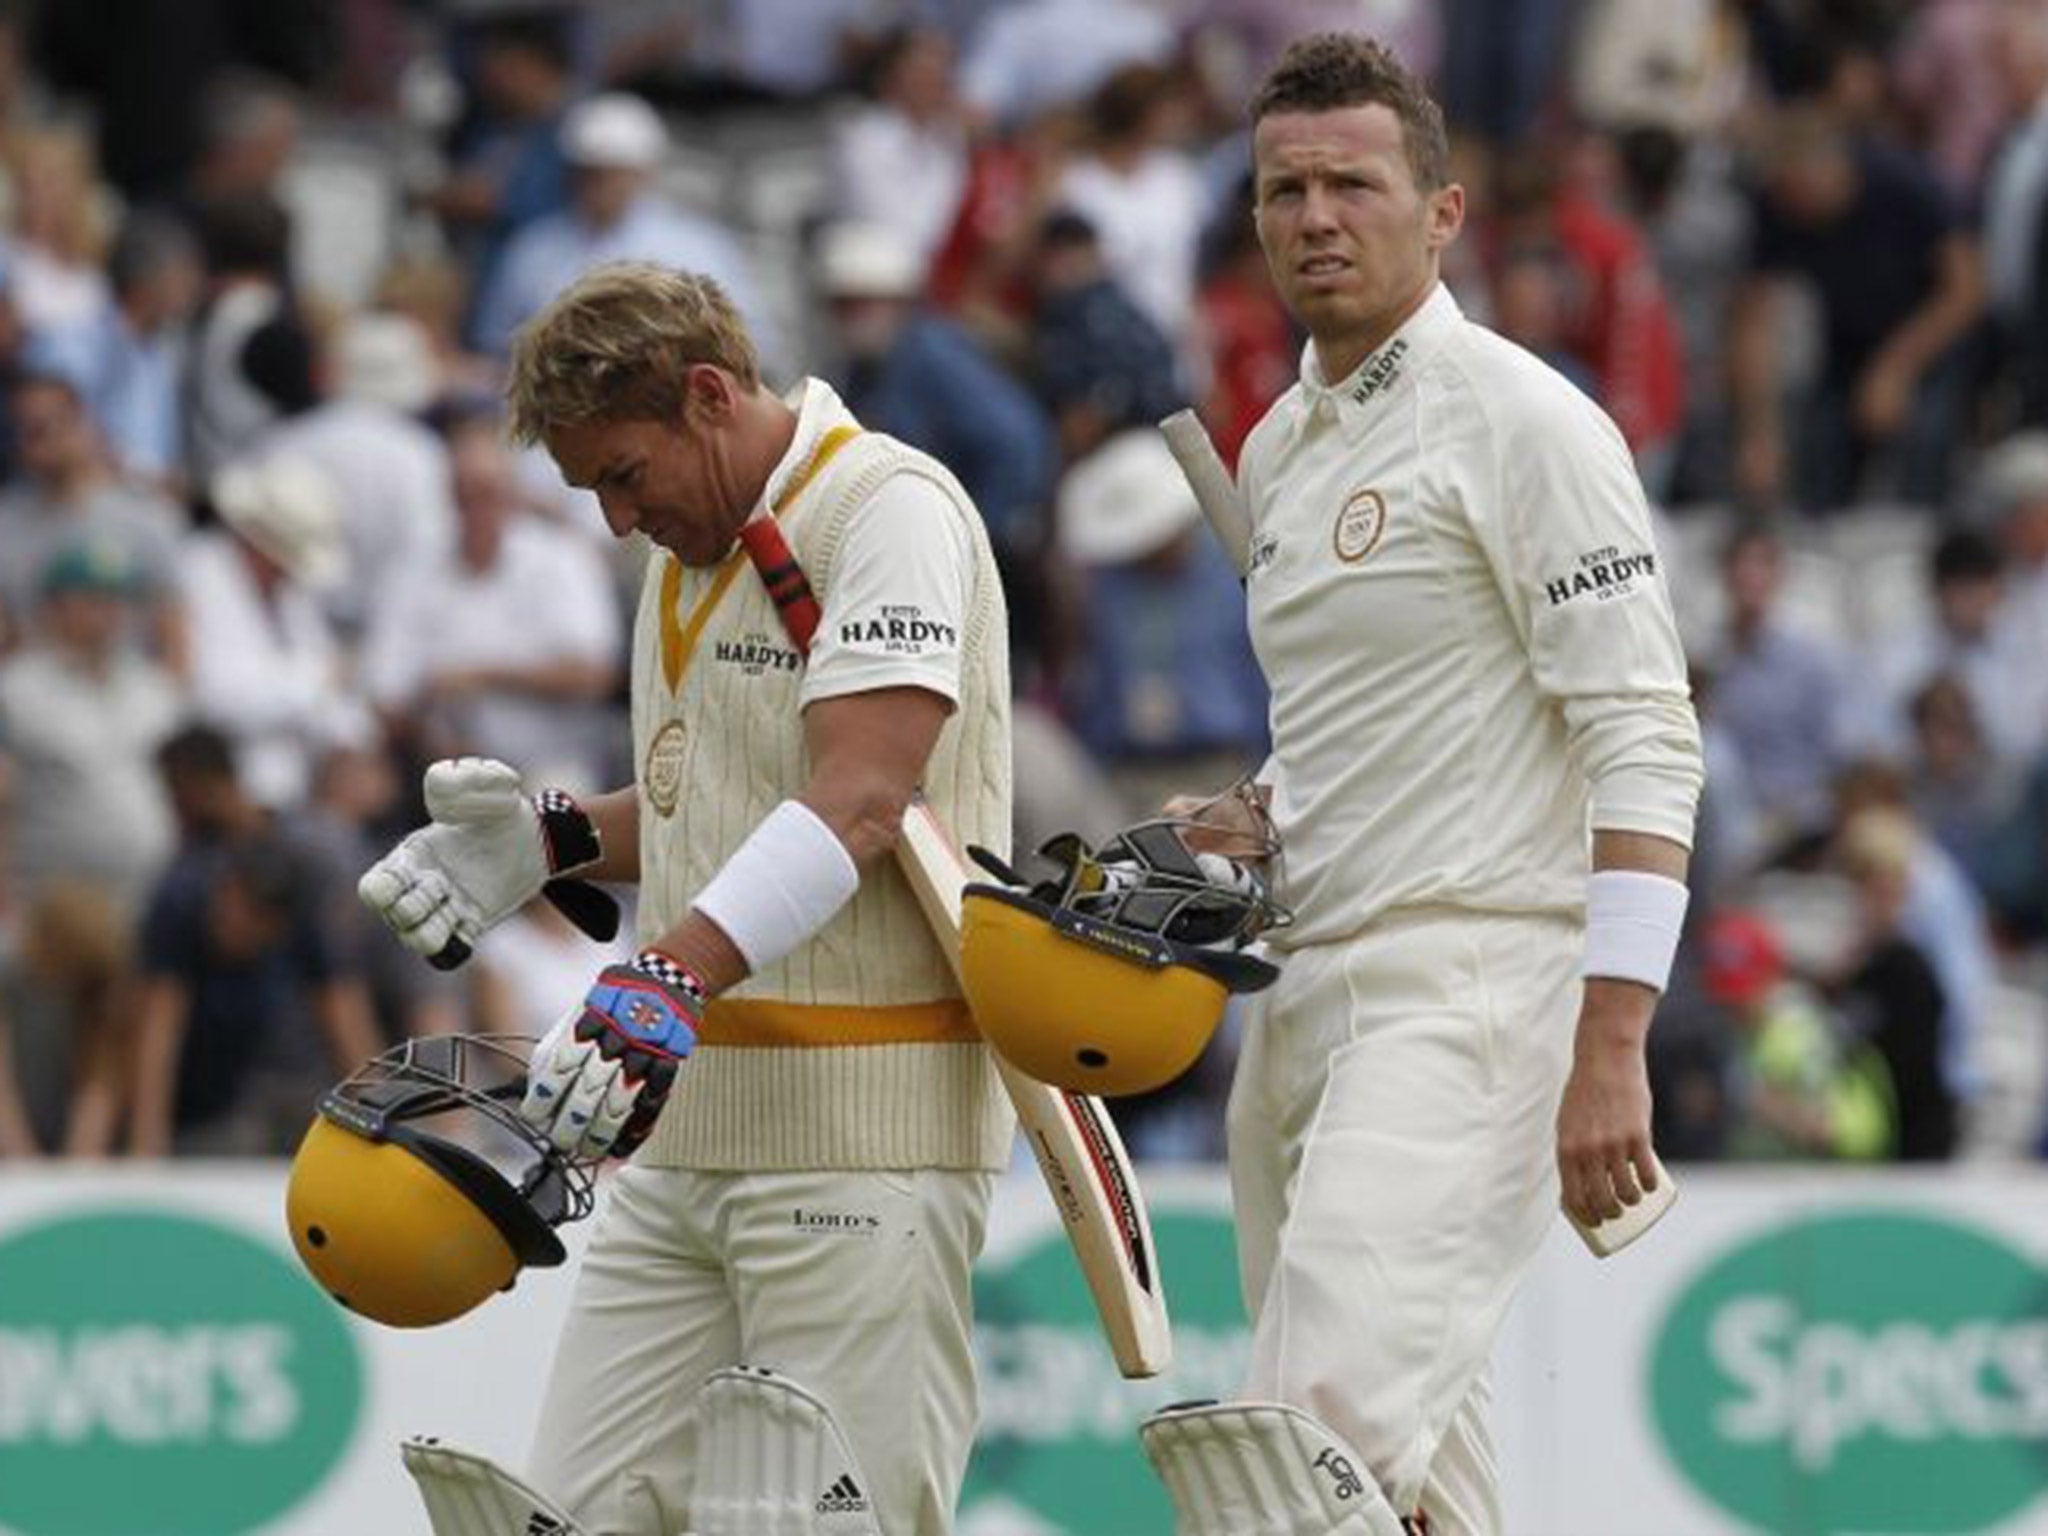 Shane Warne leaves the field with a broken hand